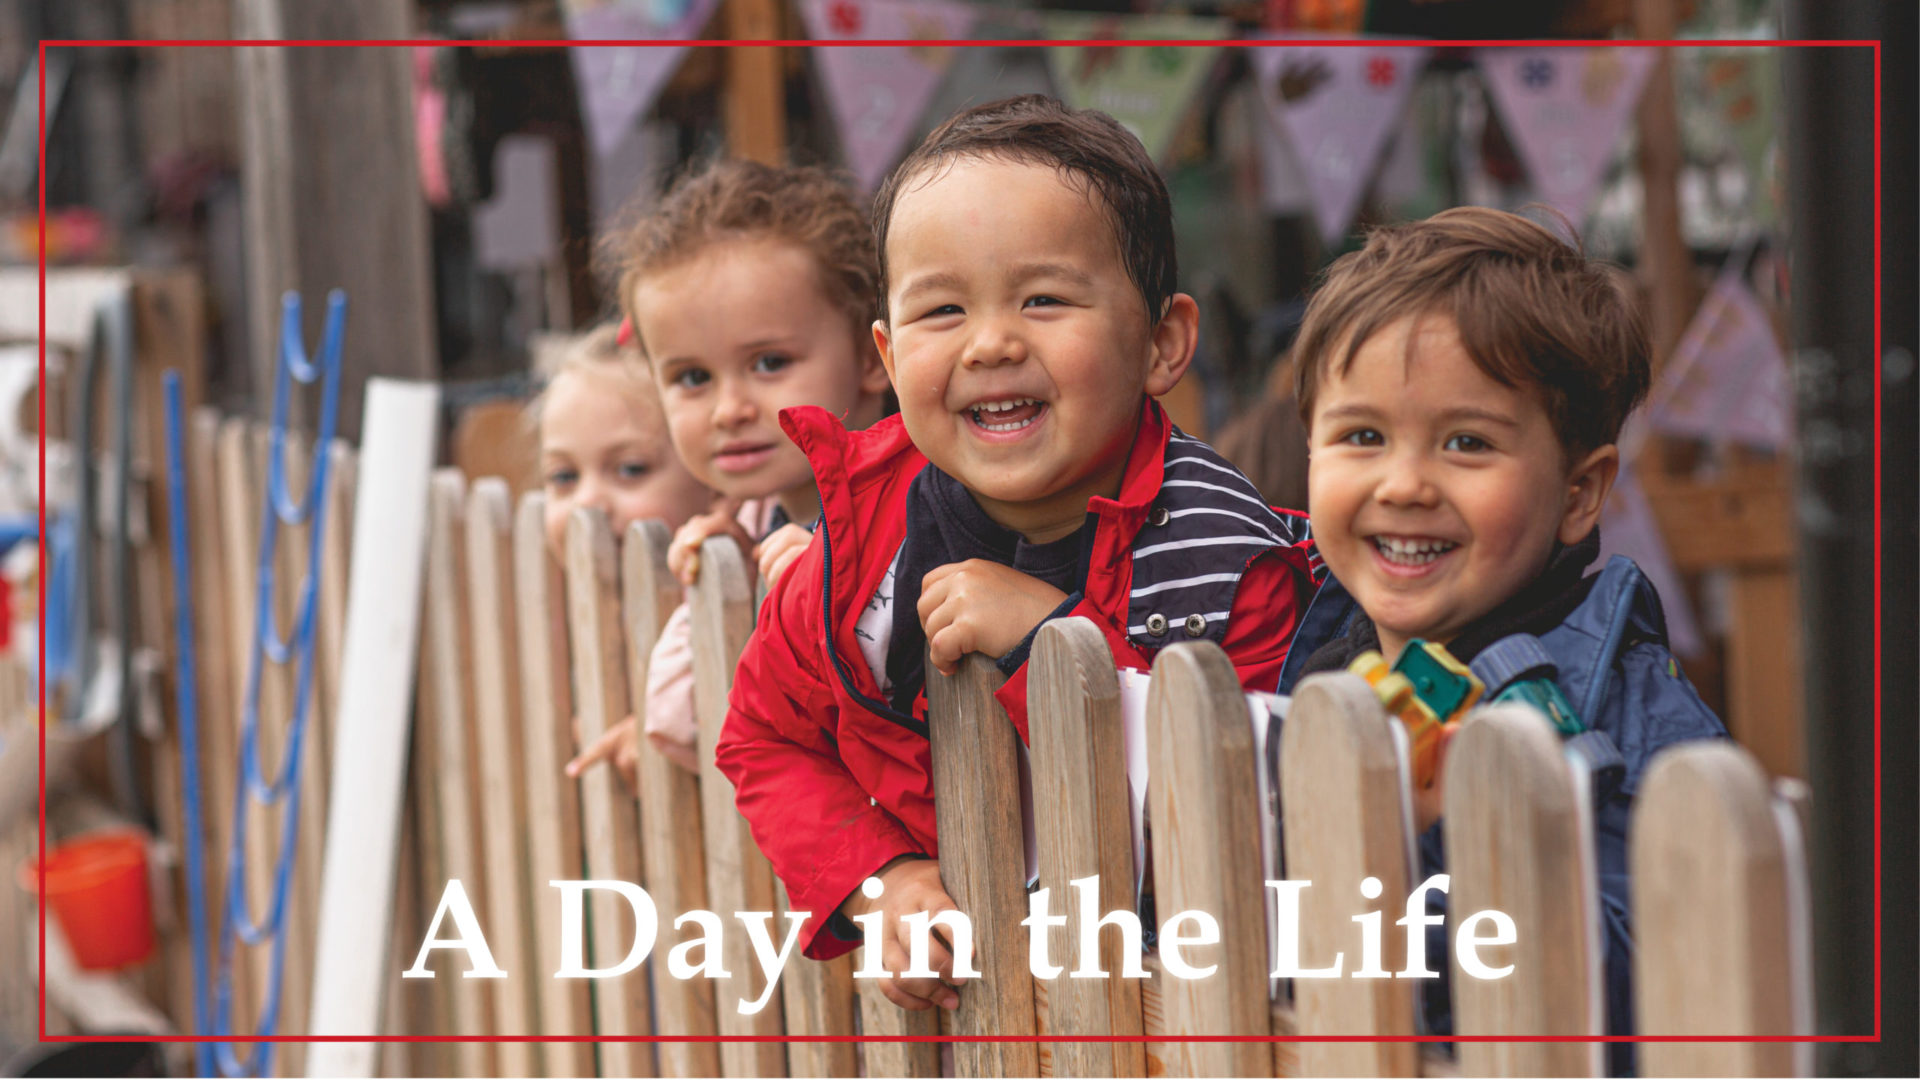 New Hall Nursery: A Day in the Life (ages 1-3)